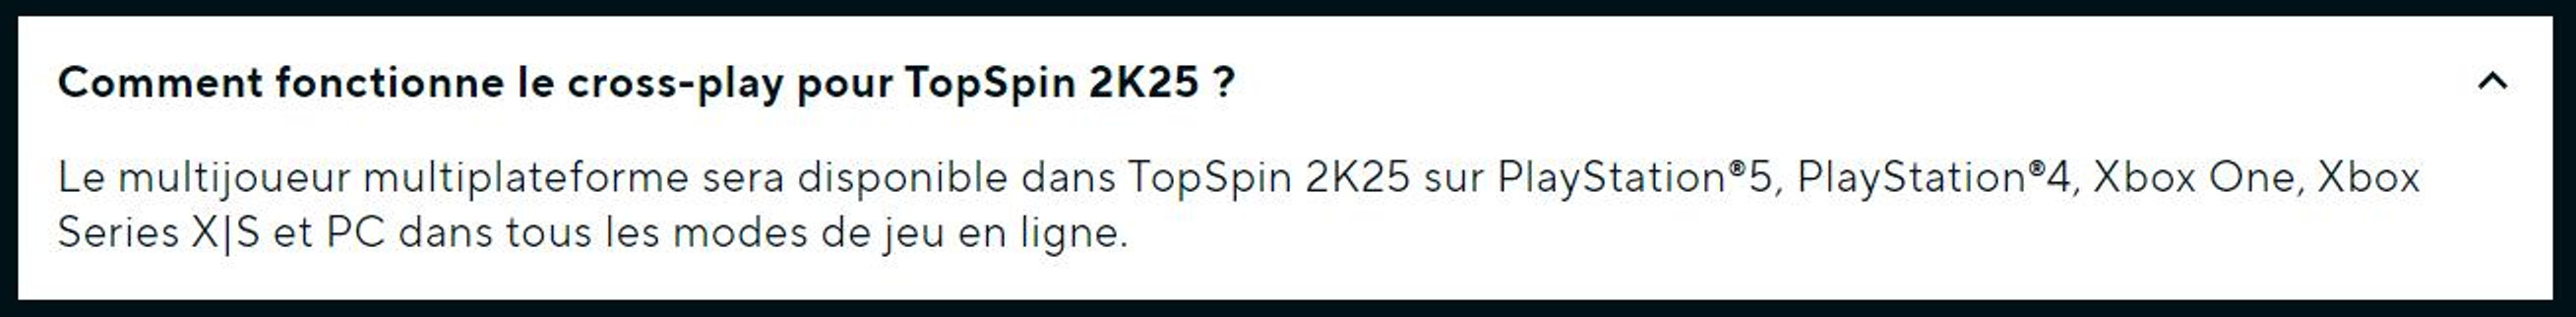 crossplay-top-spin-2k25